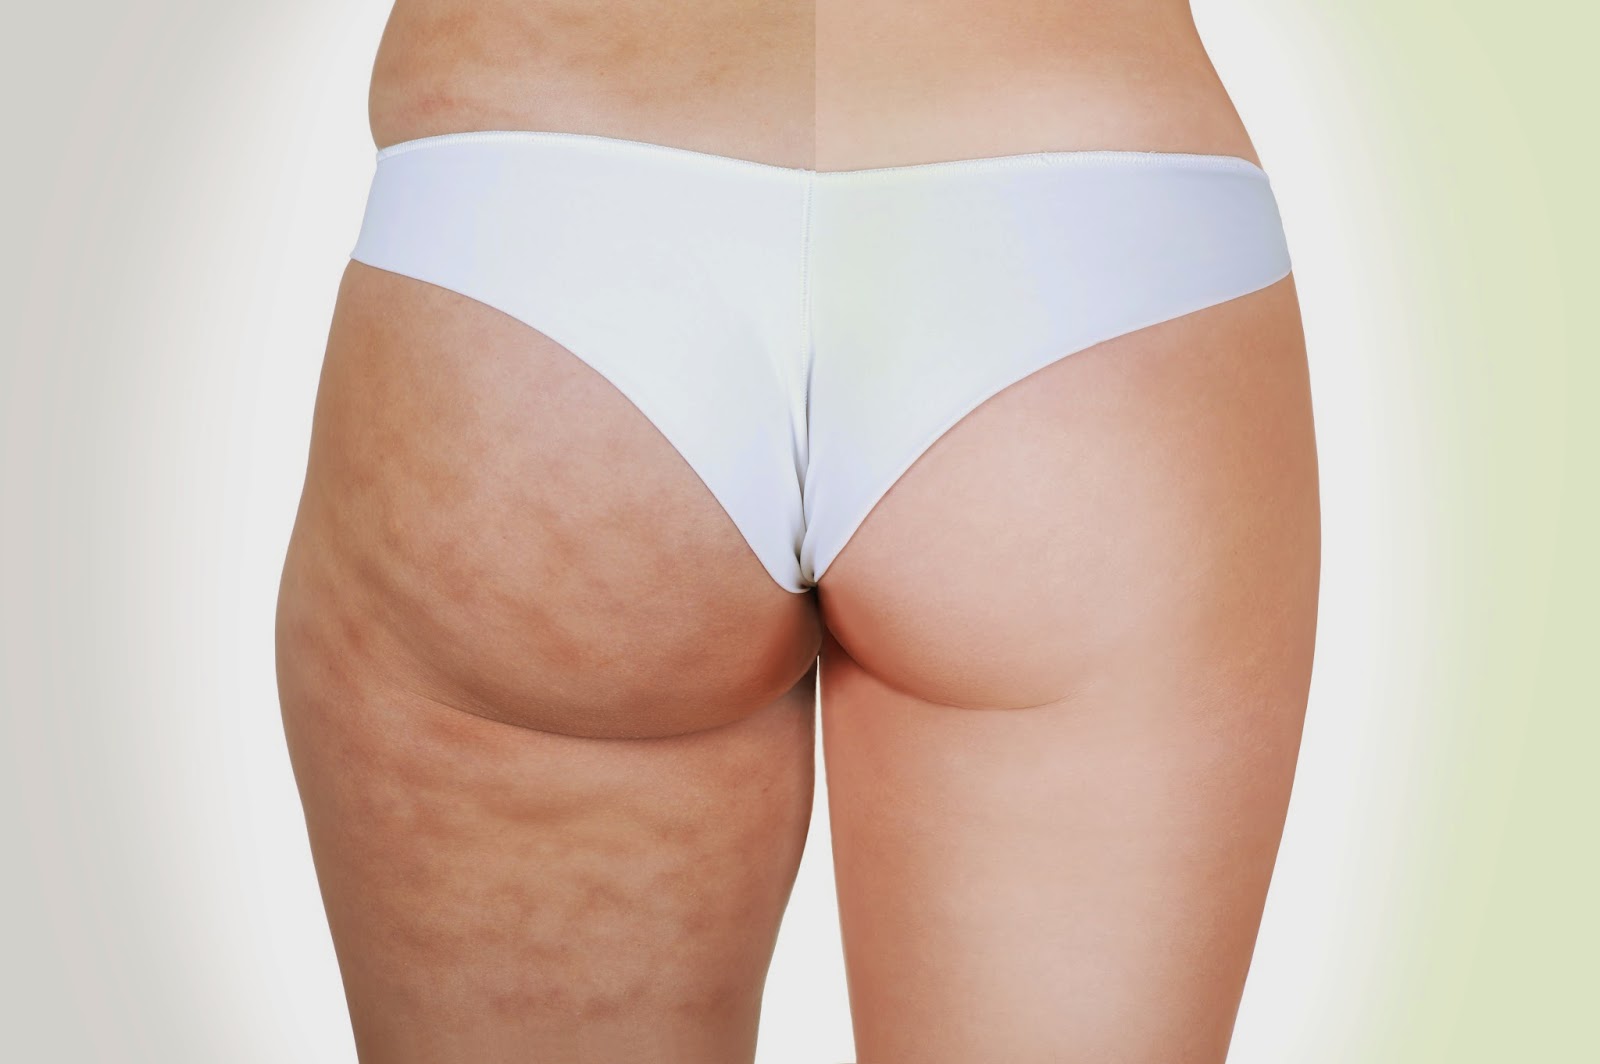 cellulite, before after, tips